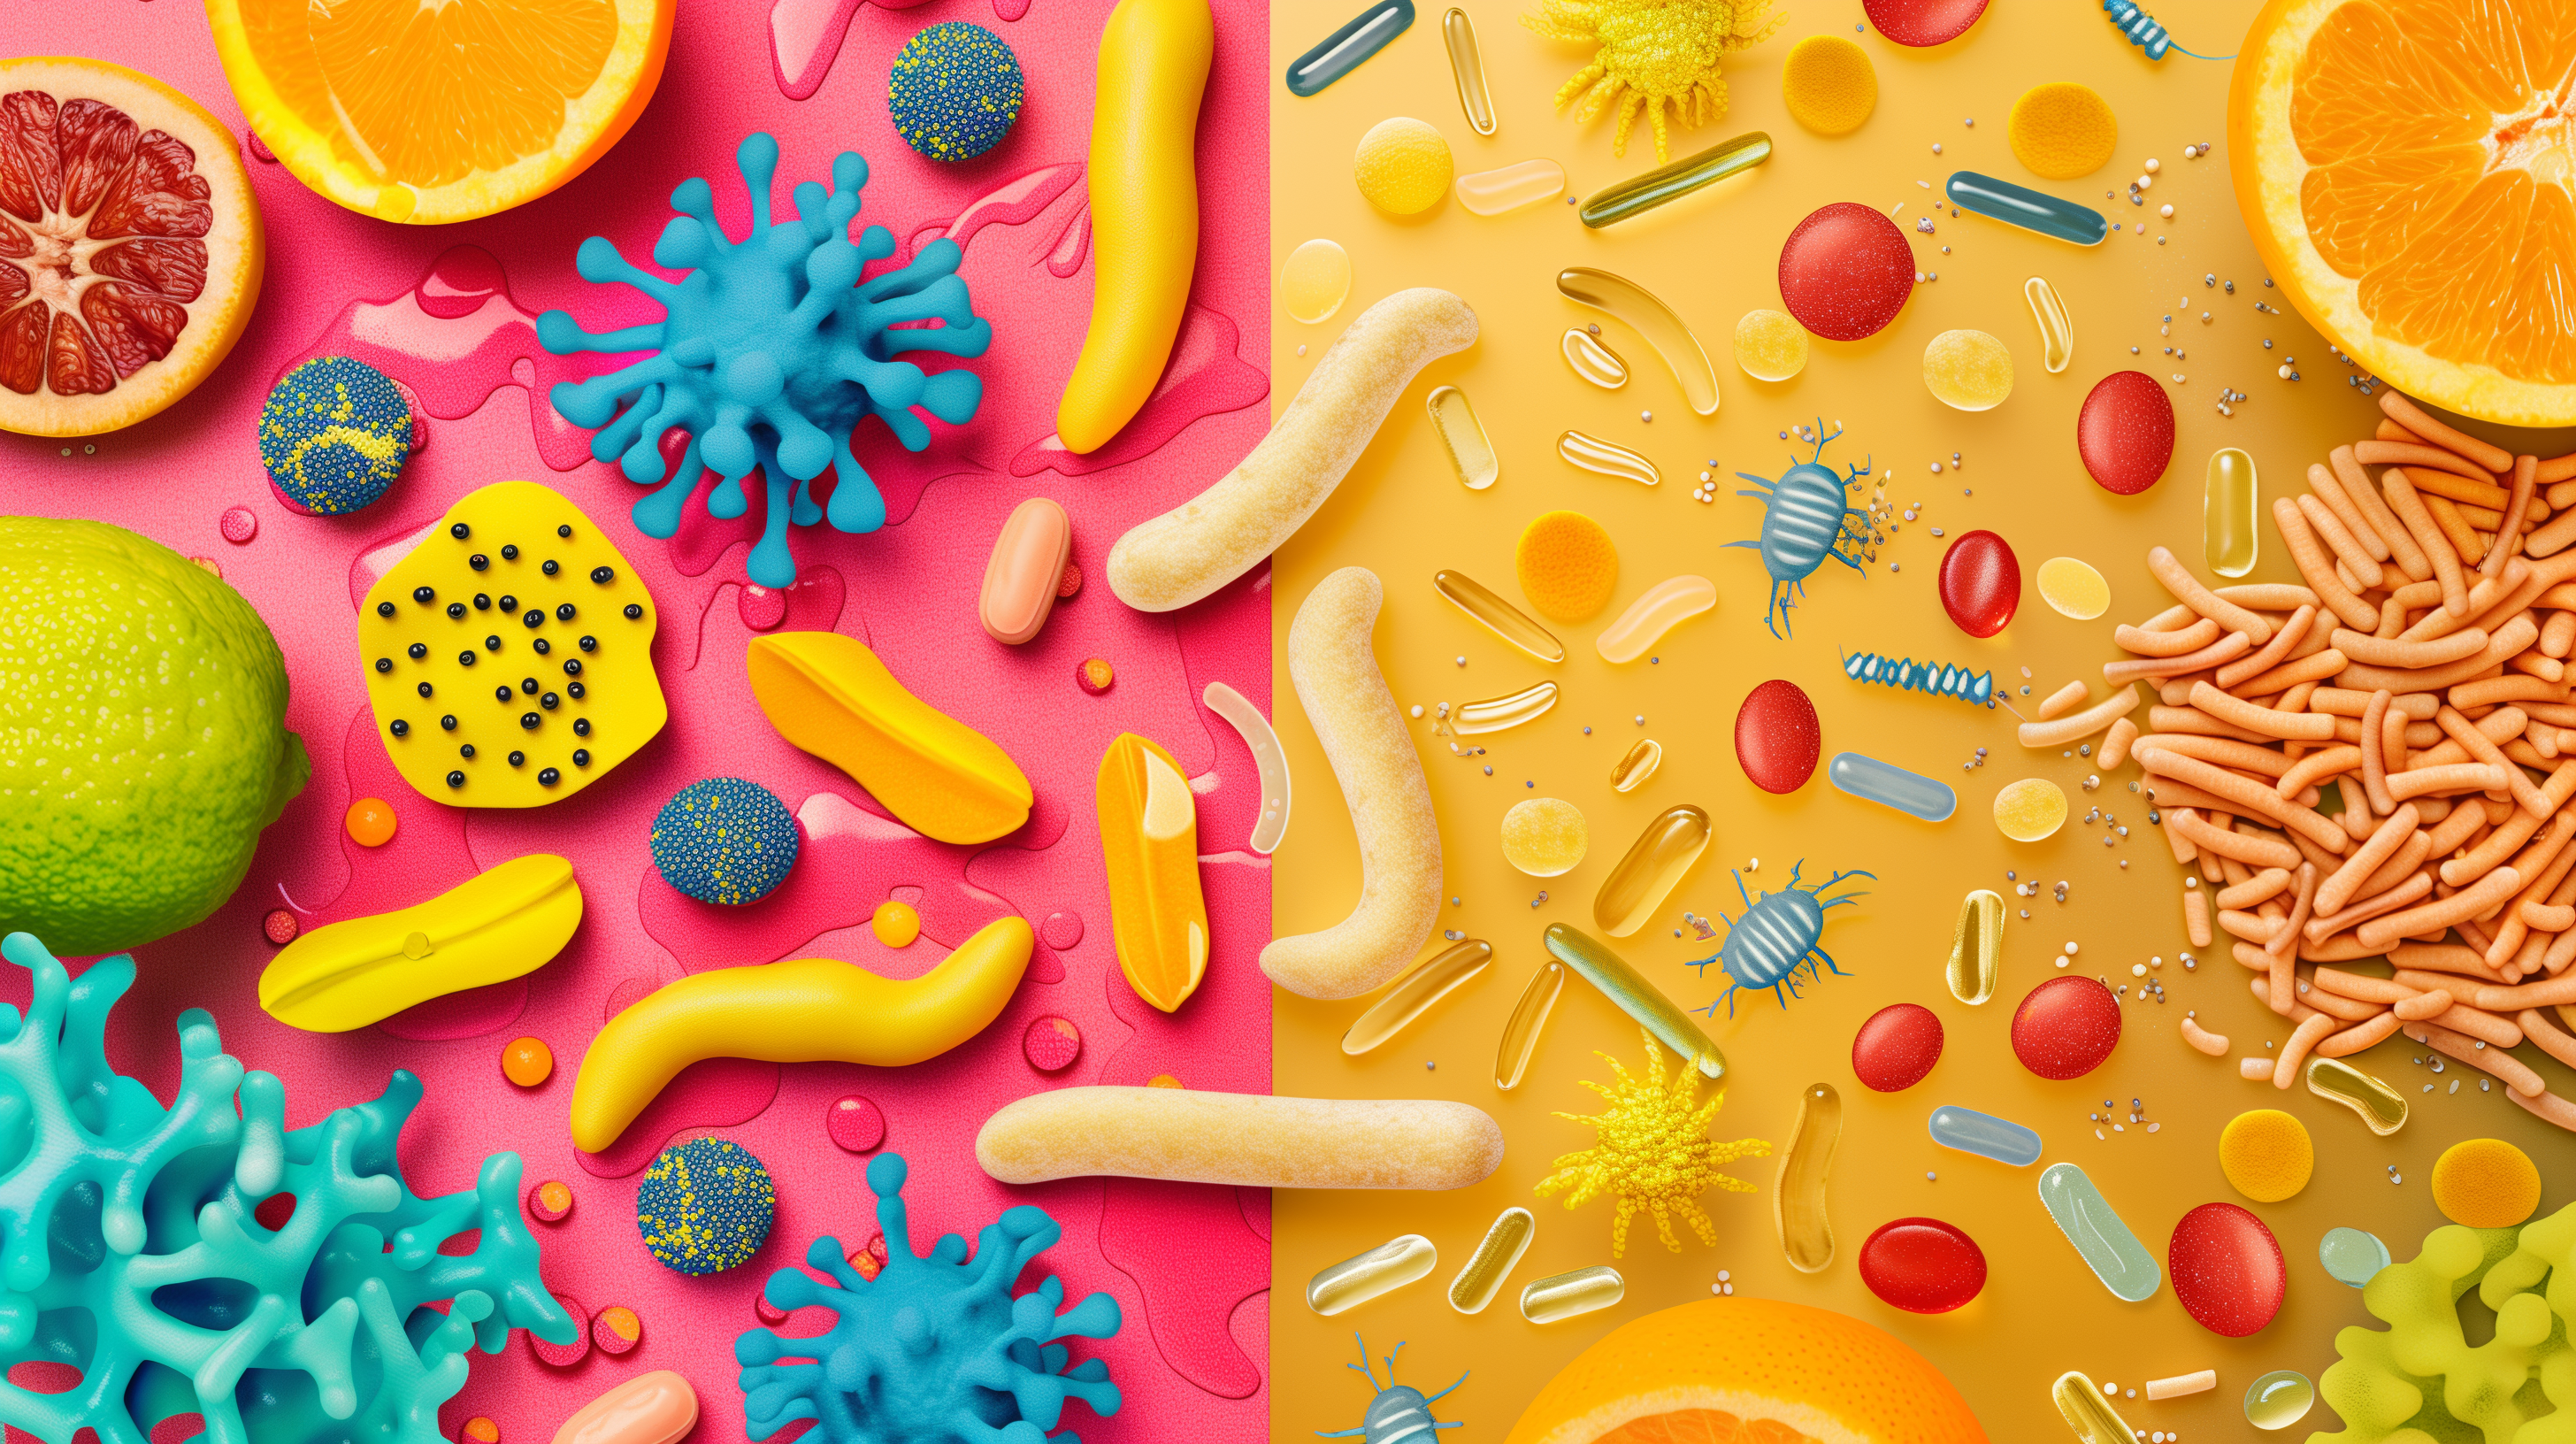 image split in half: on one side, illustrate colorful probiotic bacteria thriving in a healthy gut environment; on the other, depict fibrous prebiotic foods nurturing these bacteria